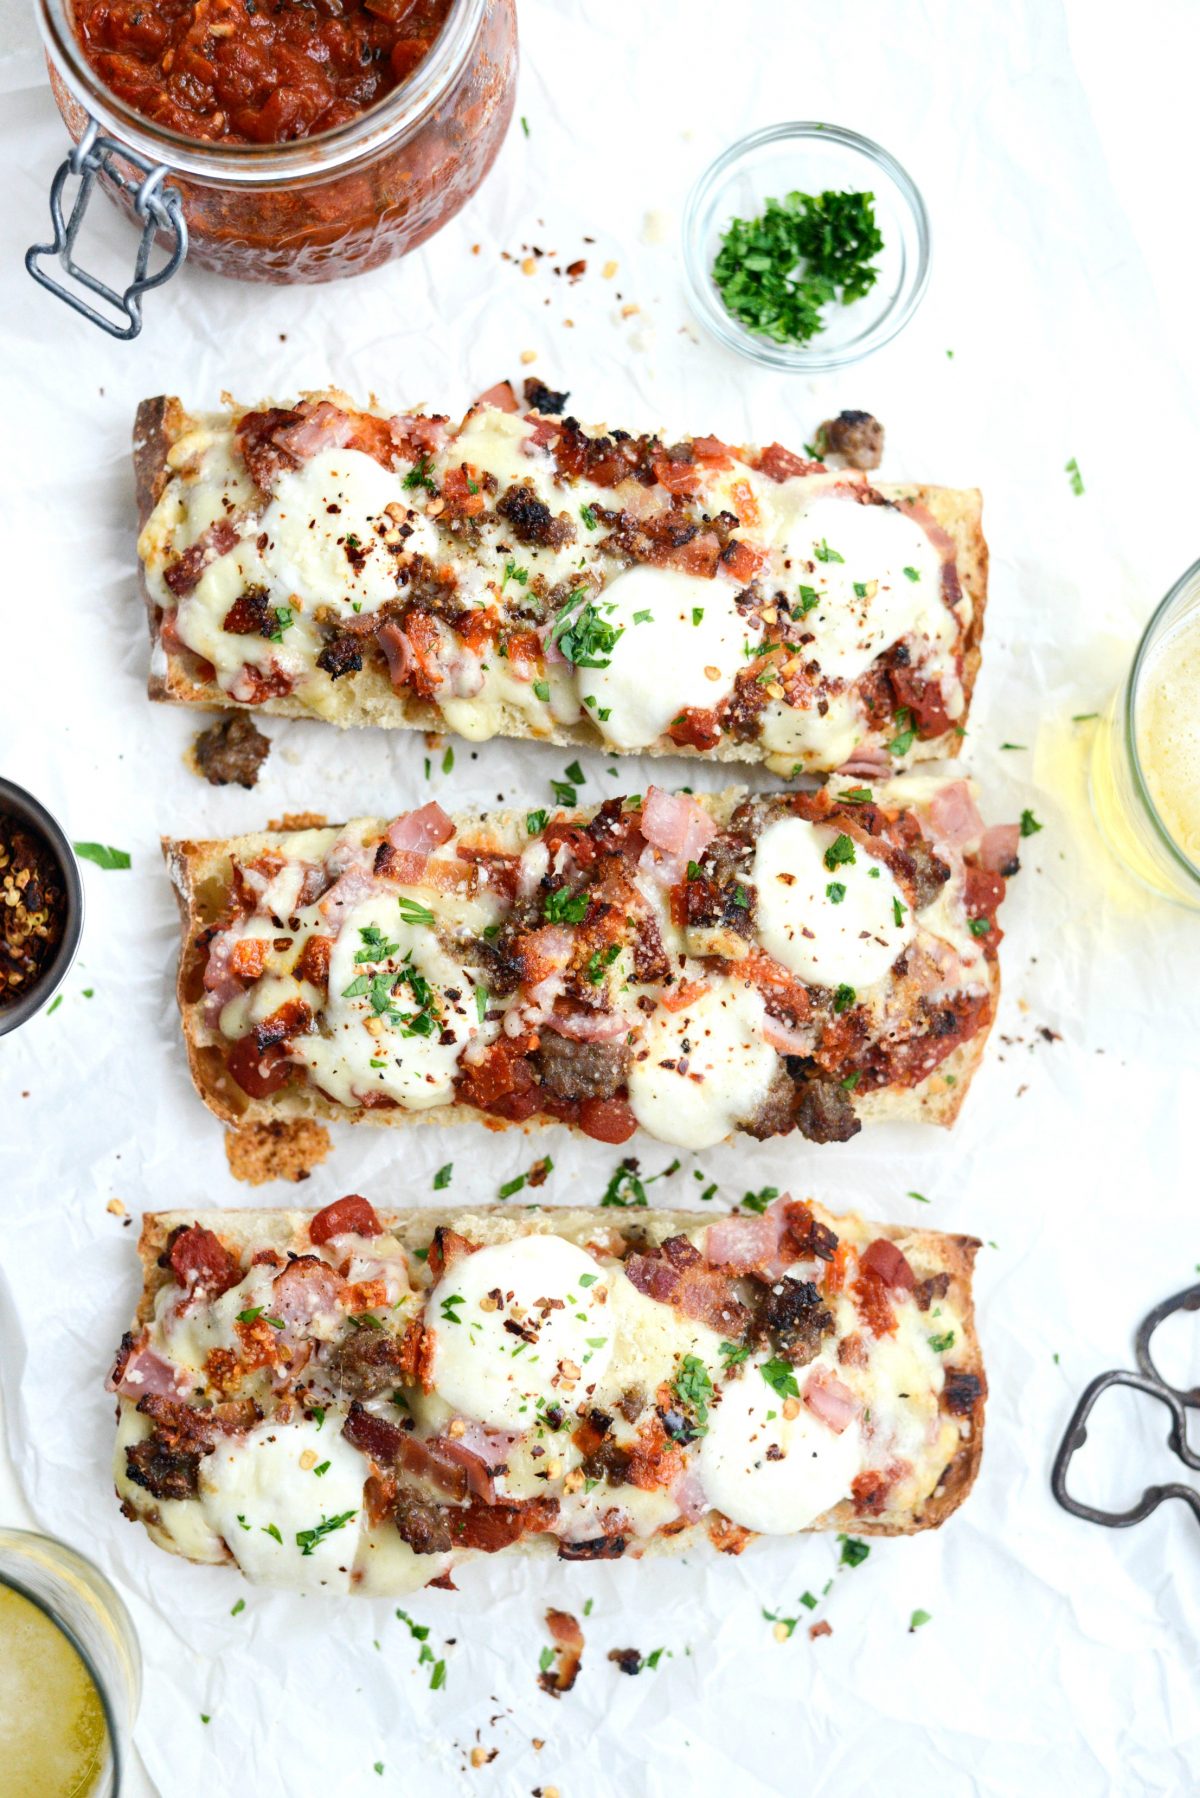 Meat Lovers Ciabatta Pizzas with Mozzarella Bombs sprinkled with pepper flakes and parsley